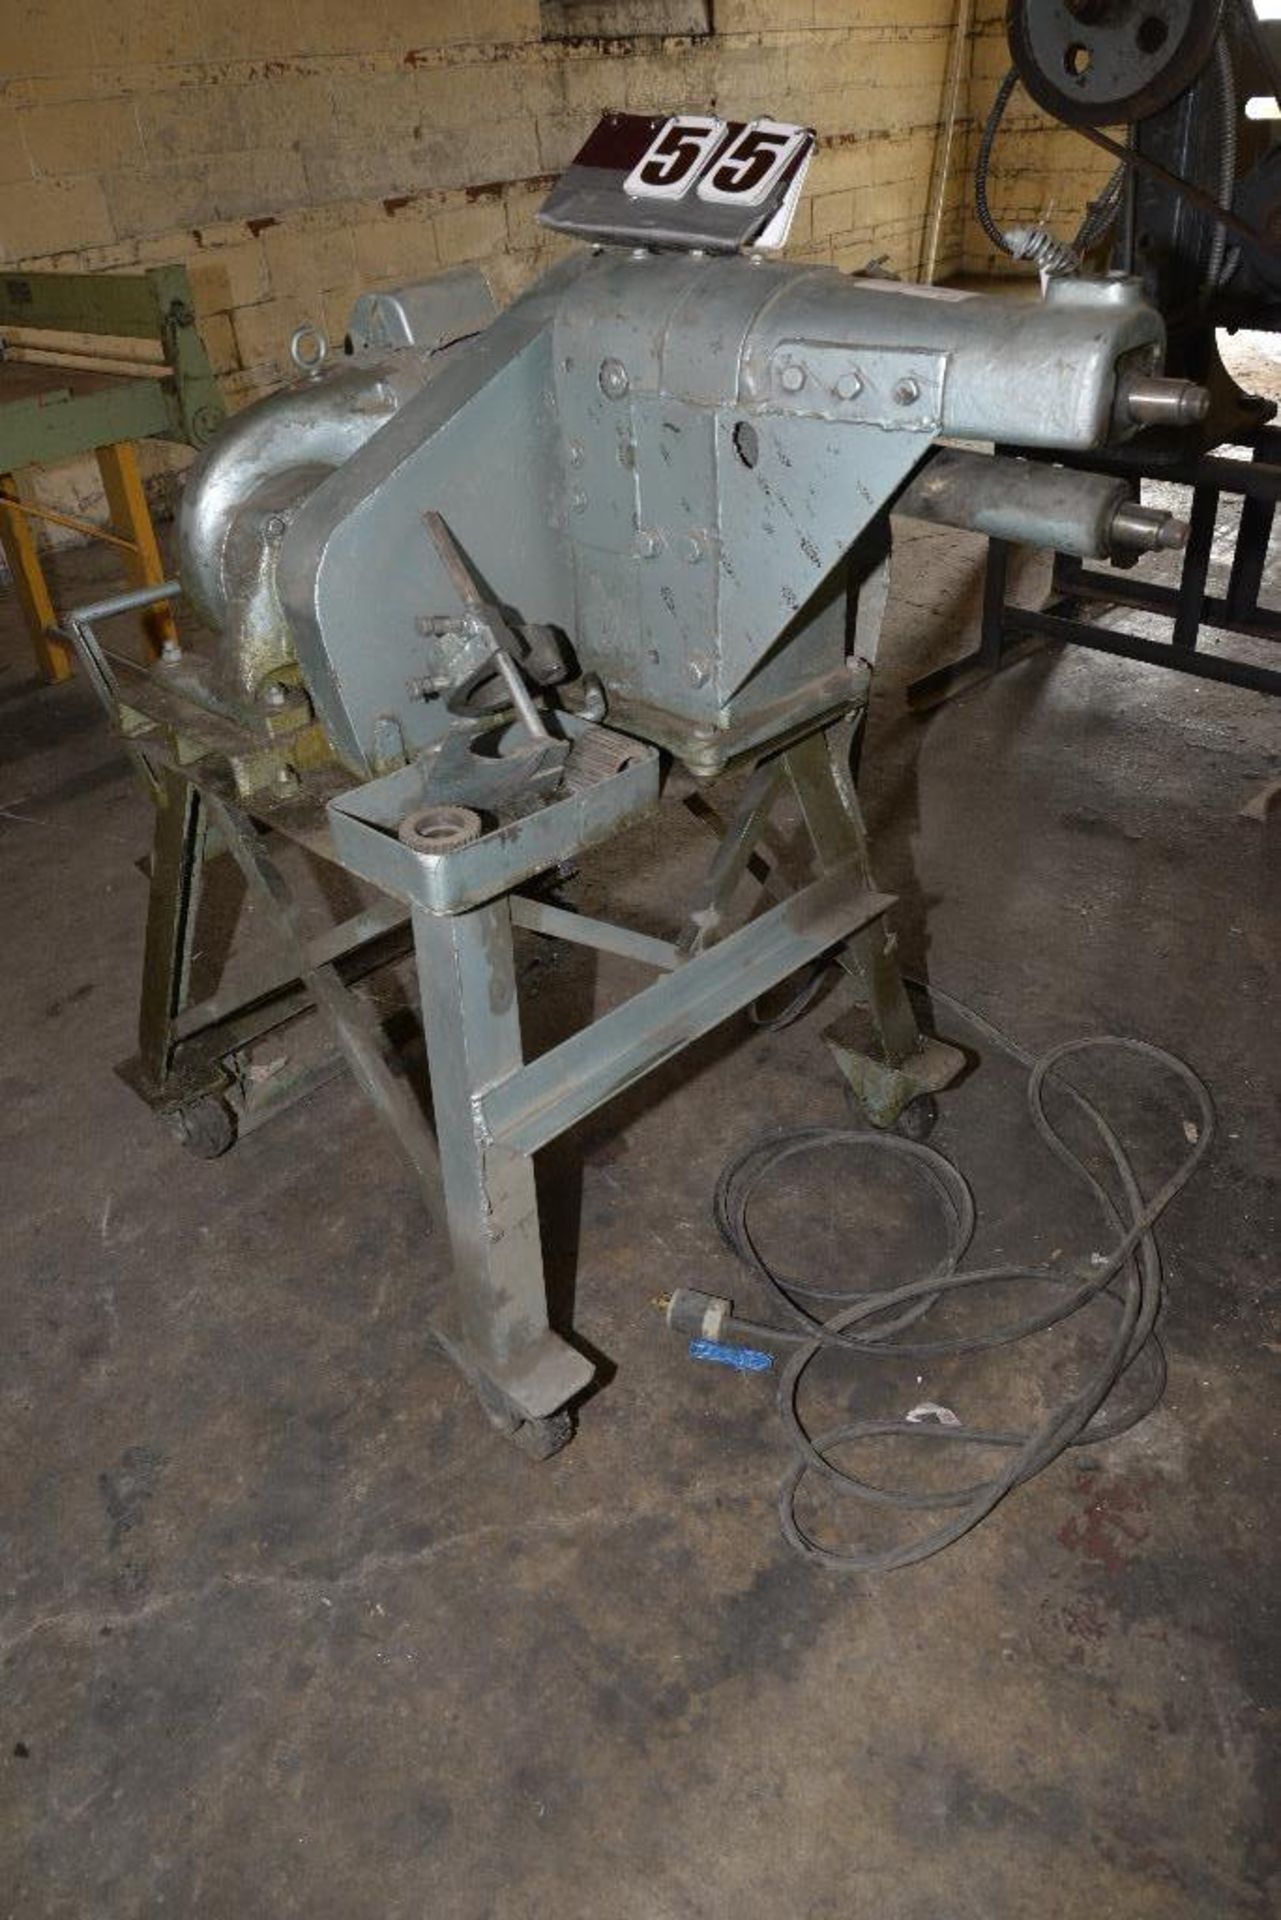 NIAGARA ROTARY MACHINE WELDED ON ROLLING STAND ARM HAS BEEN BROKEN & REWELDED - Image 7 of 11